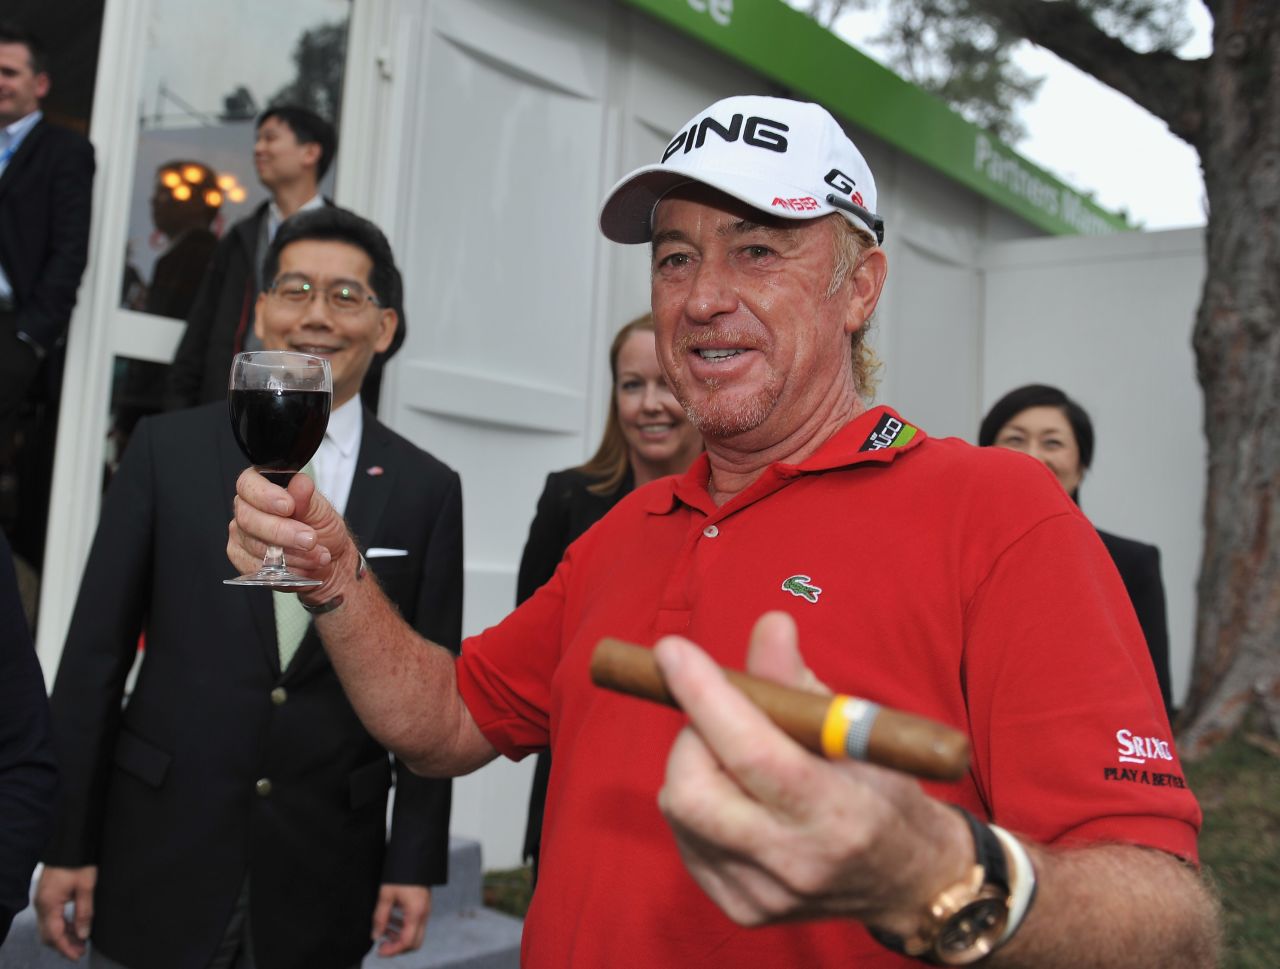 In 2012, Jimenez became the European Tour's oldest winner when he triumphed at the Hong Kong Open, then aged 48. He broke that record by retaining his title the following year after recovering from a broken leg suffered on a skiing holiday.  